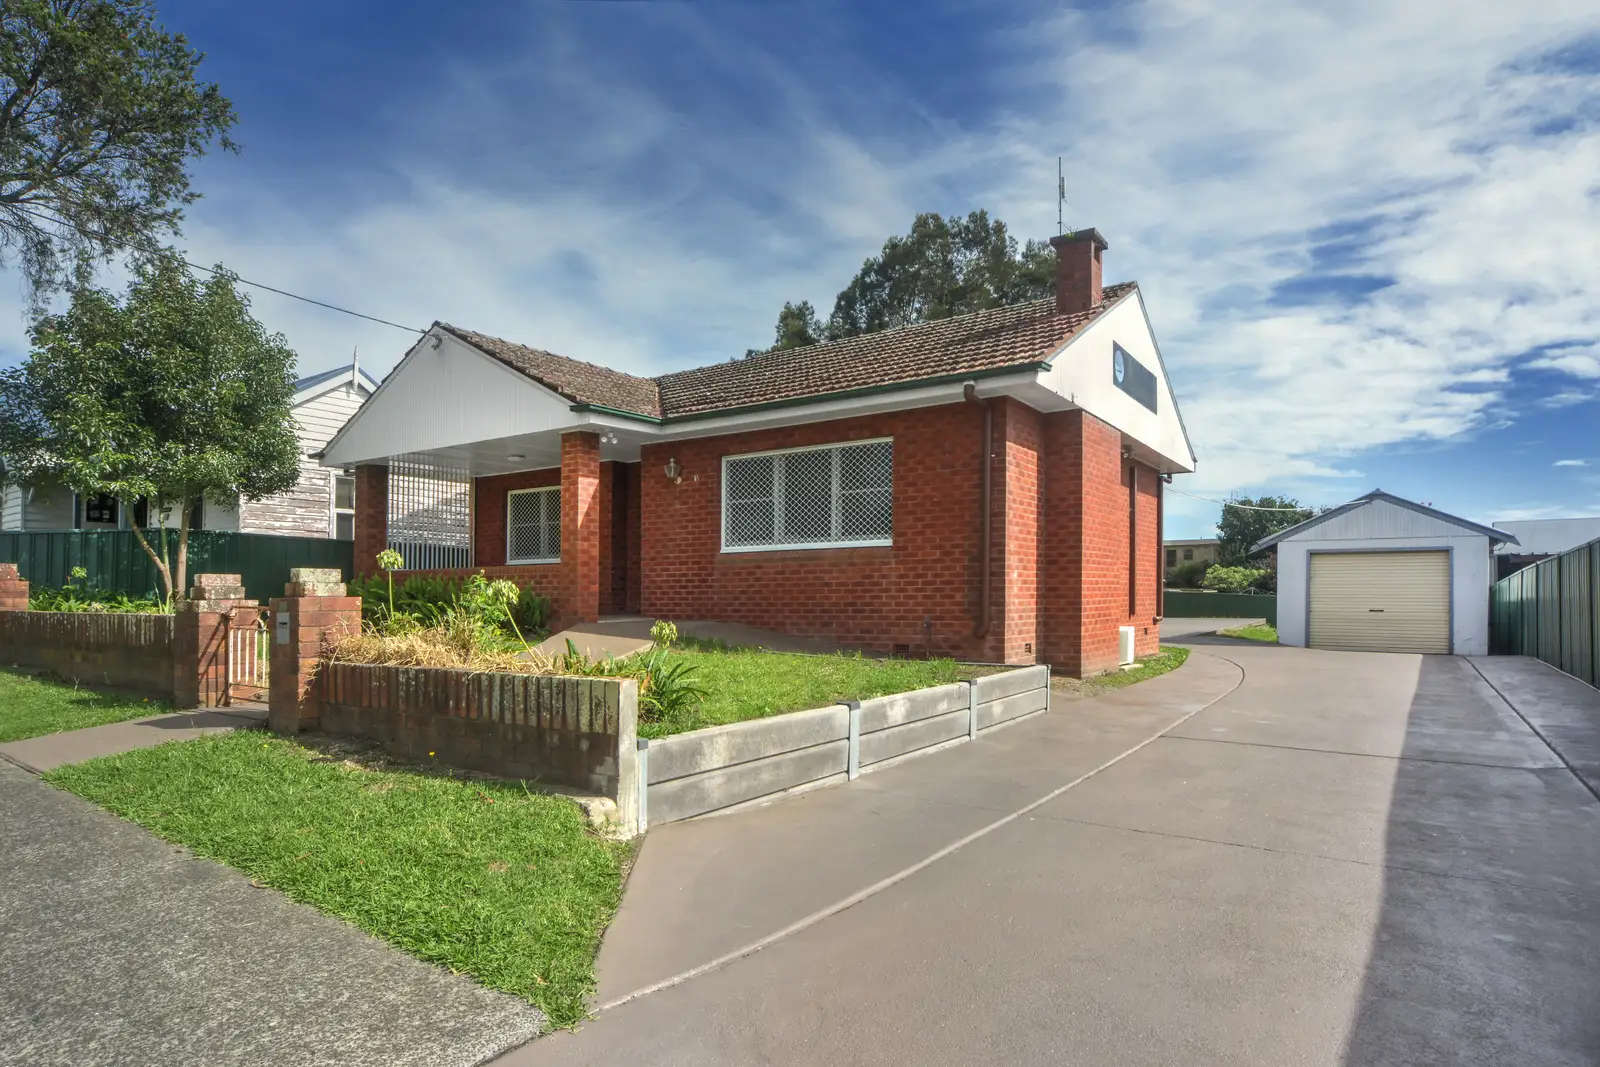 63 Plunkett Street, Nowra Leased by Integrity Real Estate